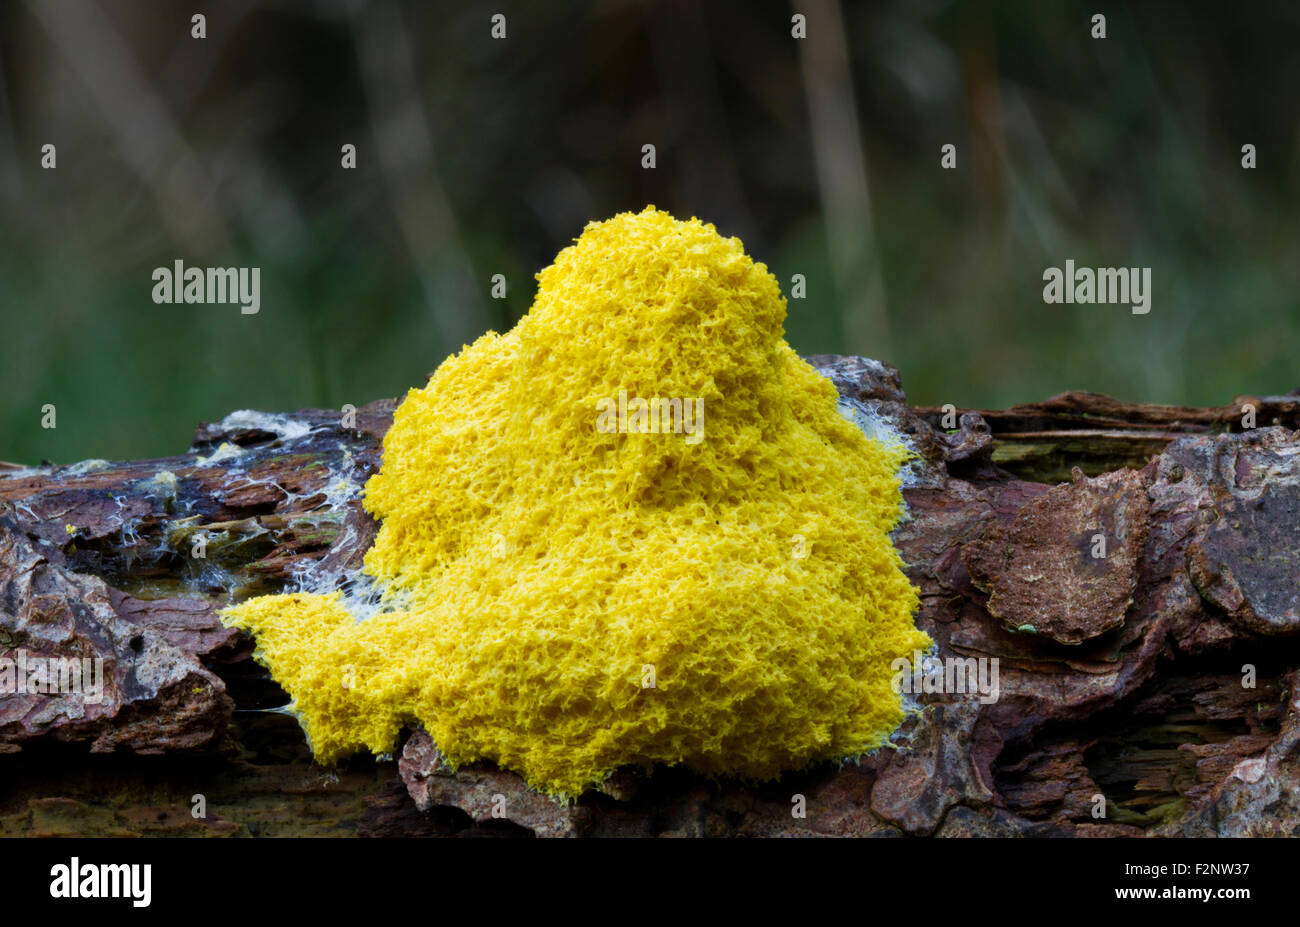 Scrambled egg slime or Flowers of tan (Fuligo septica), a species of plasmodial slime mold, on the bark of a dead pine tree Stock Photo